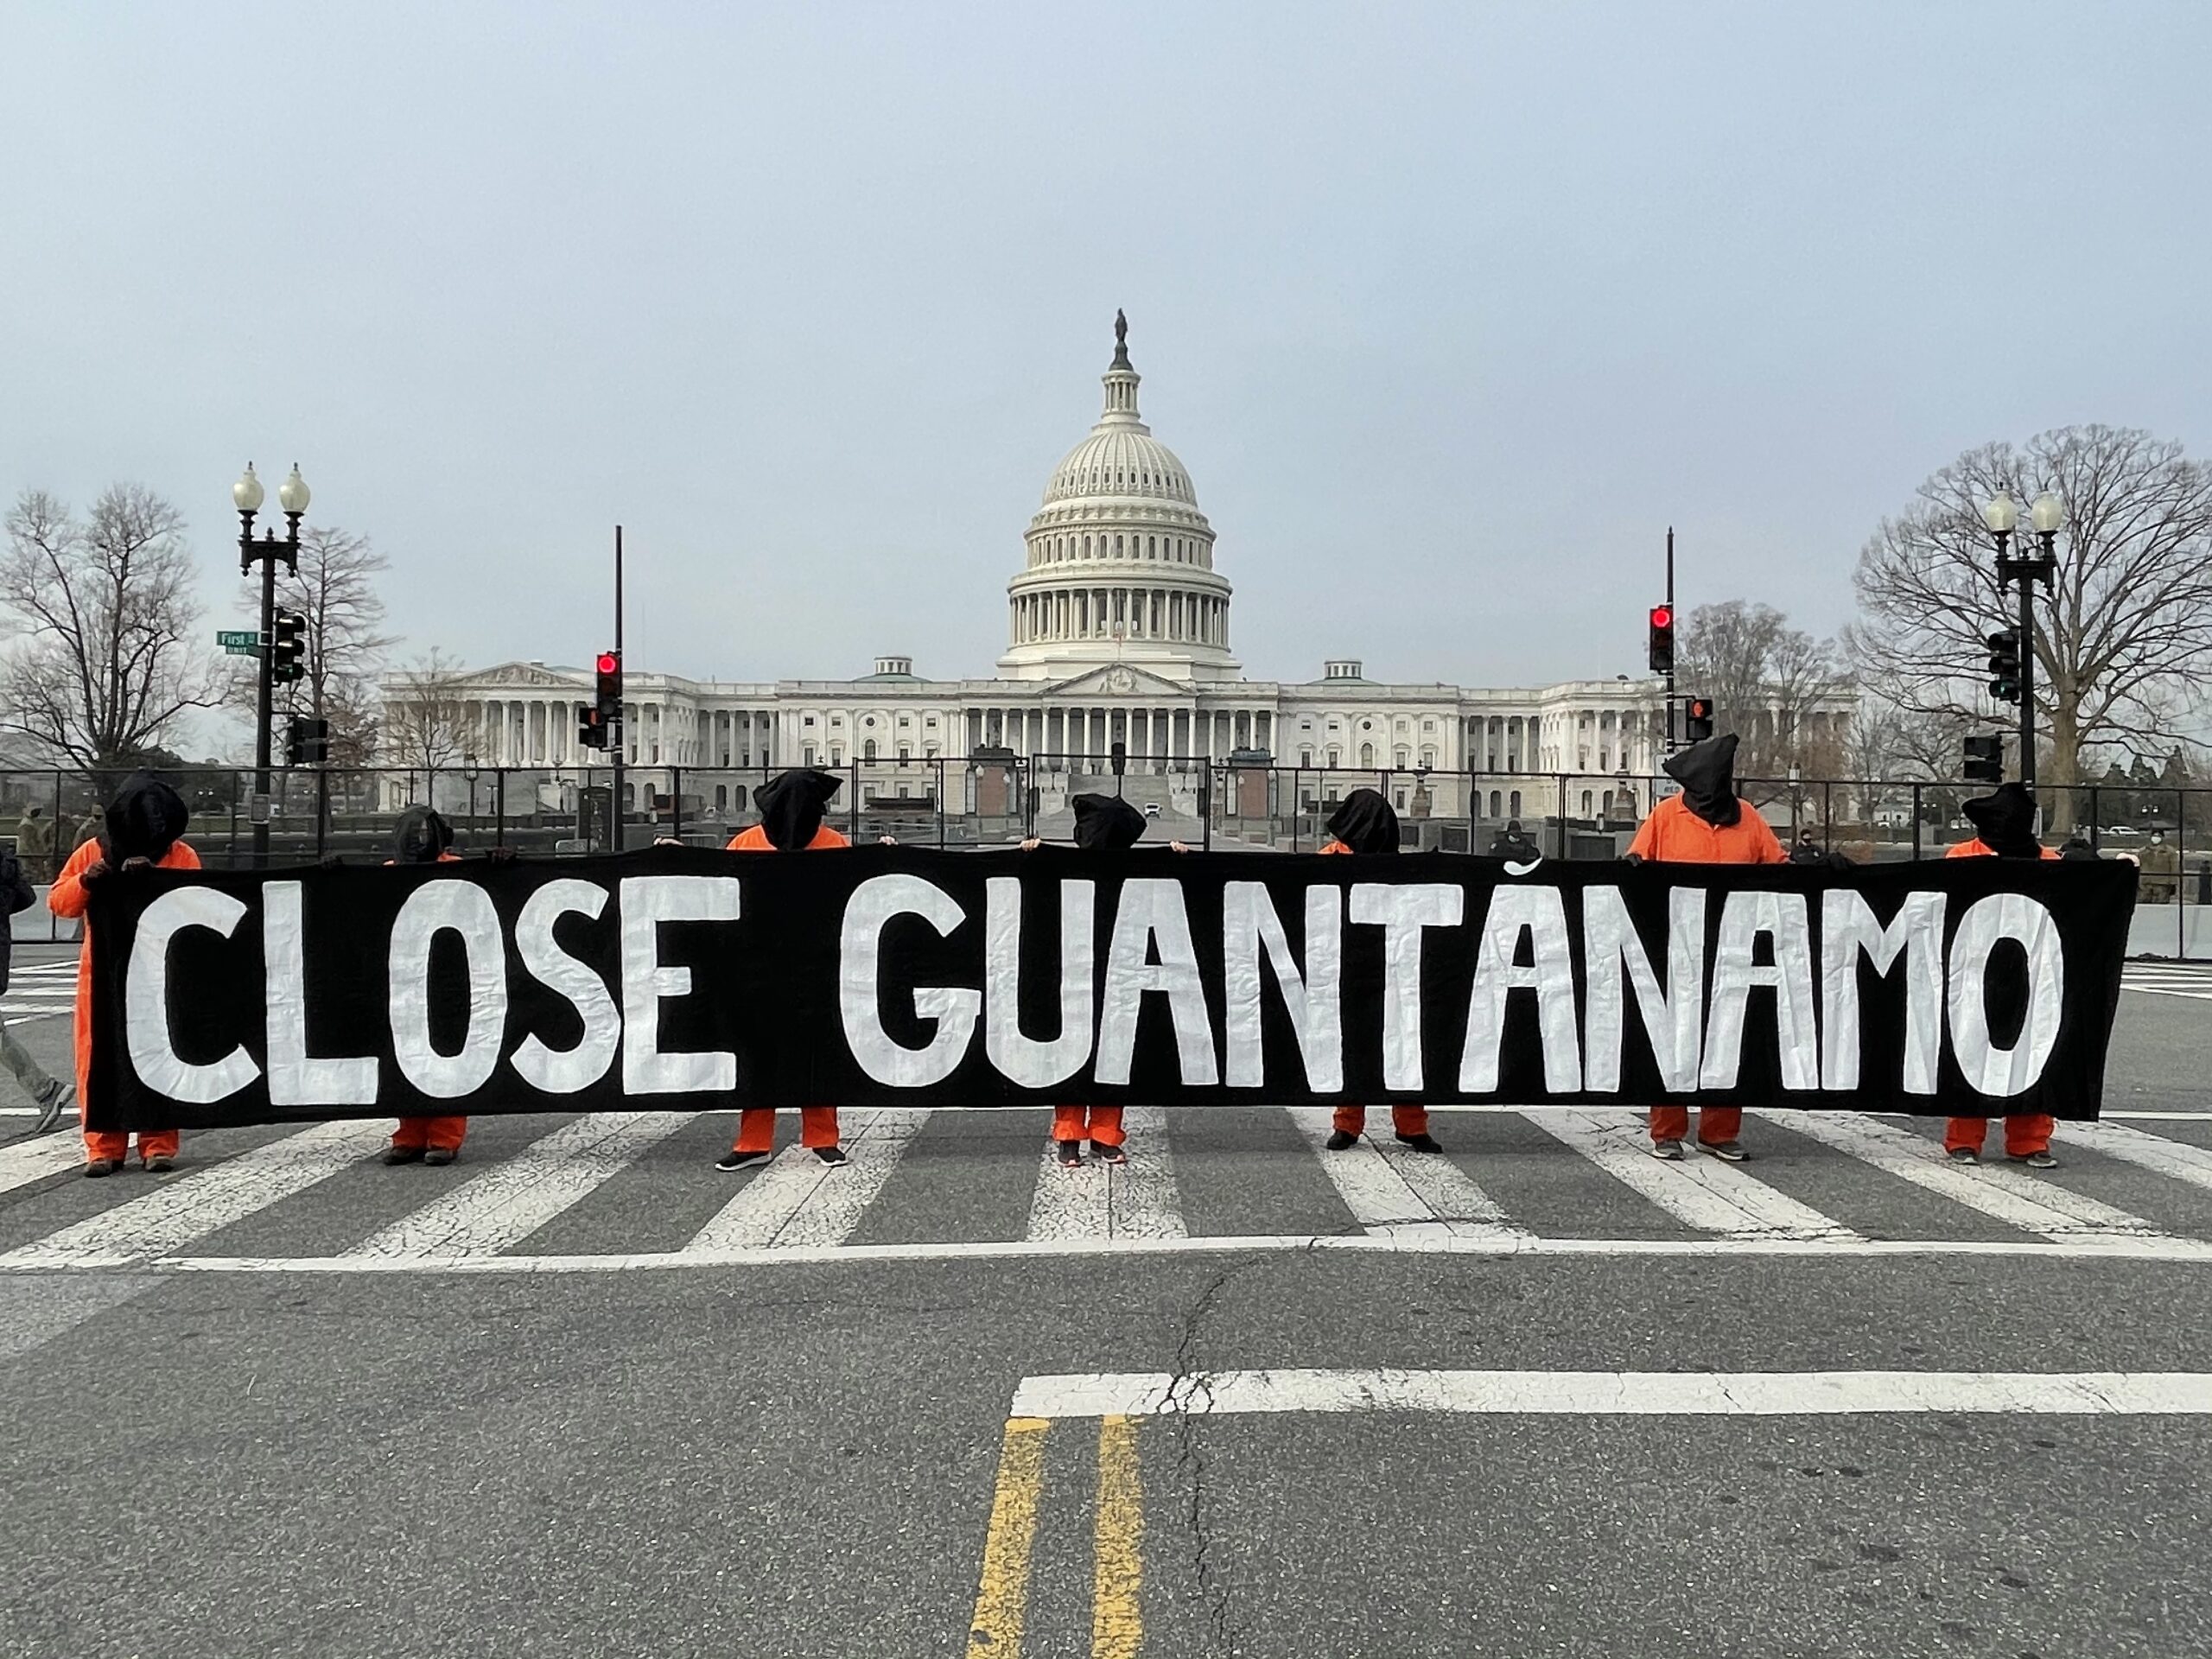 USA: UN Special Rapporteur’s findings reinforce urgent need to close Guantánamo and provide redress for past and present detainees